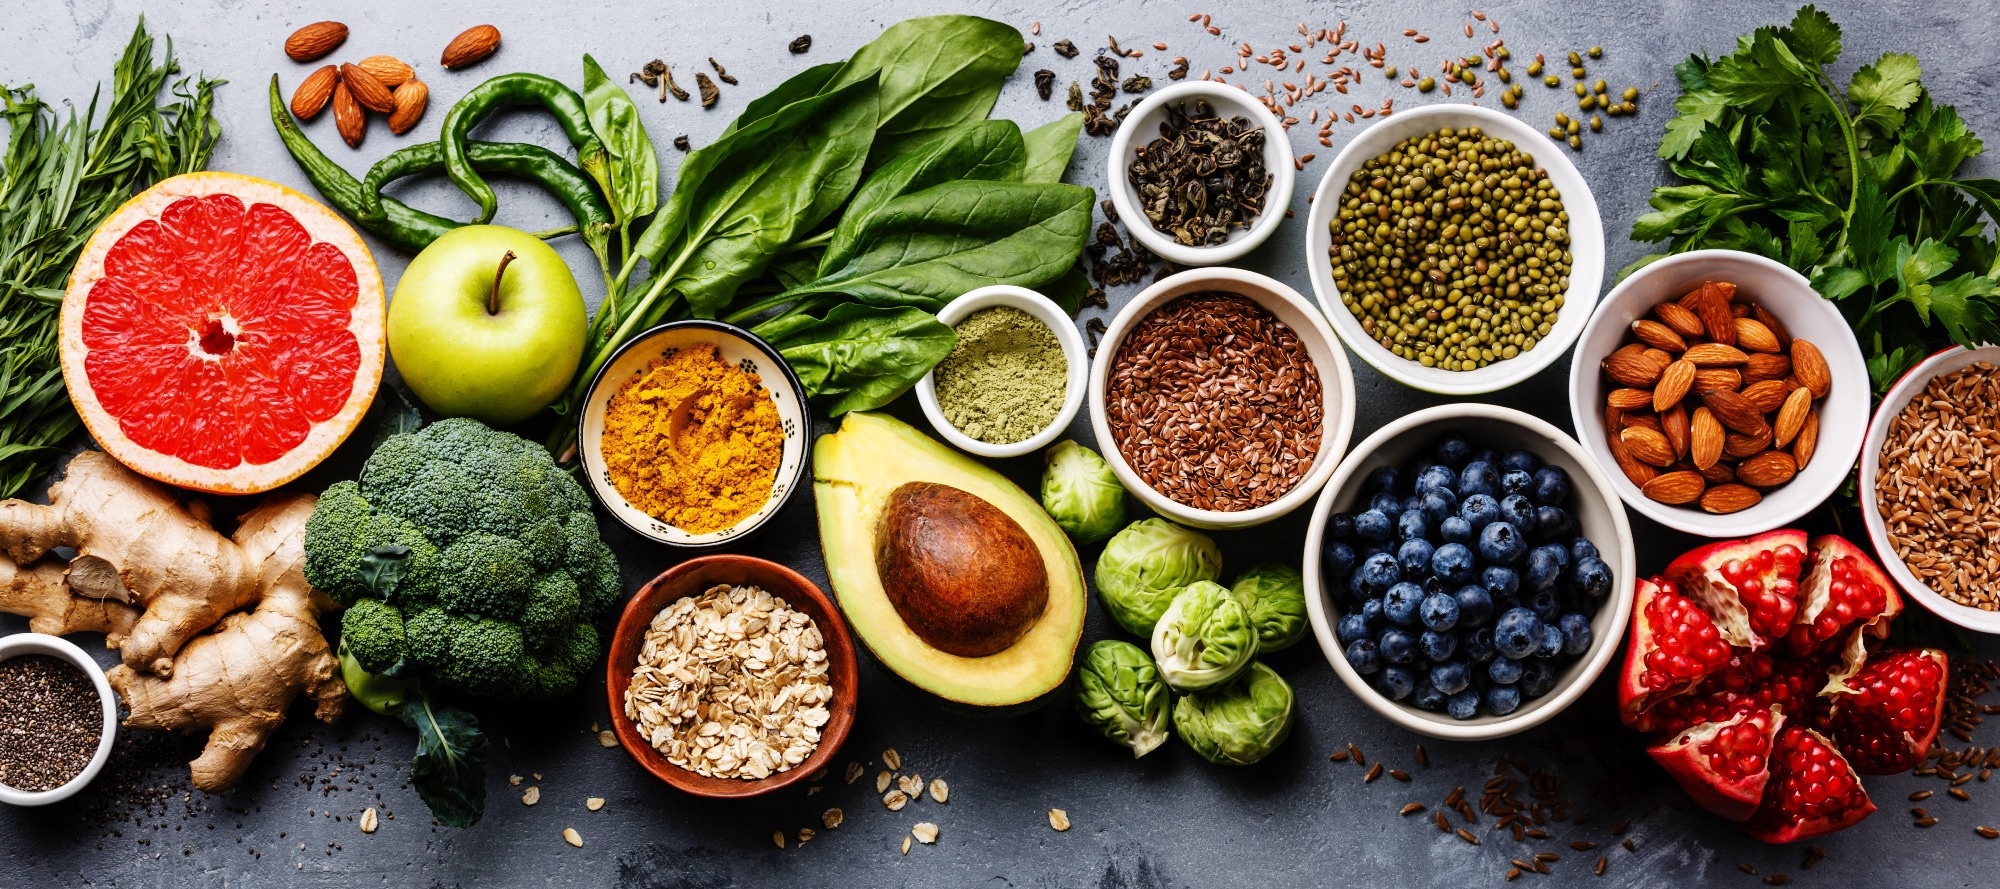 Study: Effect of 8-Week Consumption of a Dietary Pattern Based on Fruit, Avocado, Whole Grains, and Trout on Postprandial Inflammatory and Oxidative Stress Gene Expression in Obese People. Image Credit: Natalia Lisovskaya/Shutterstock